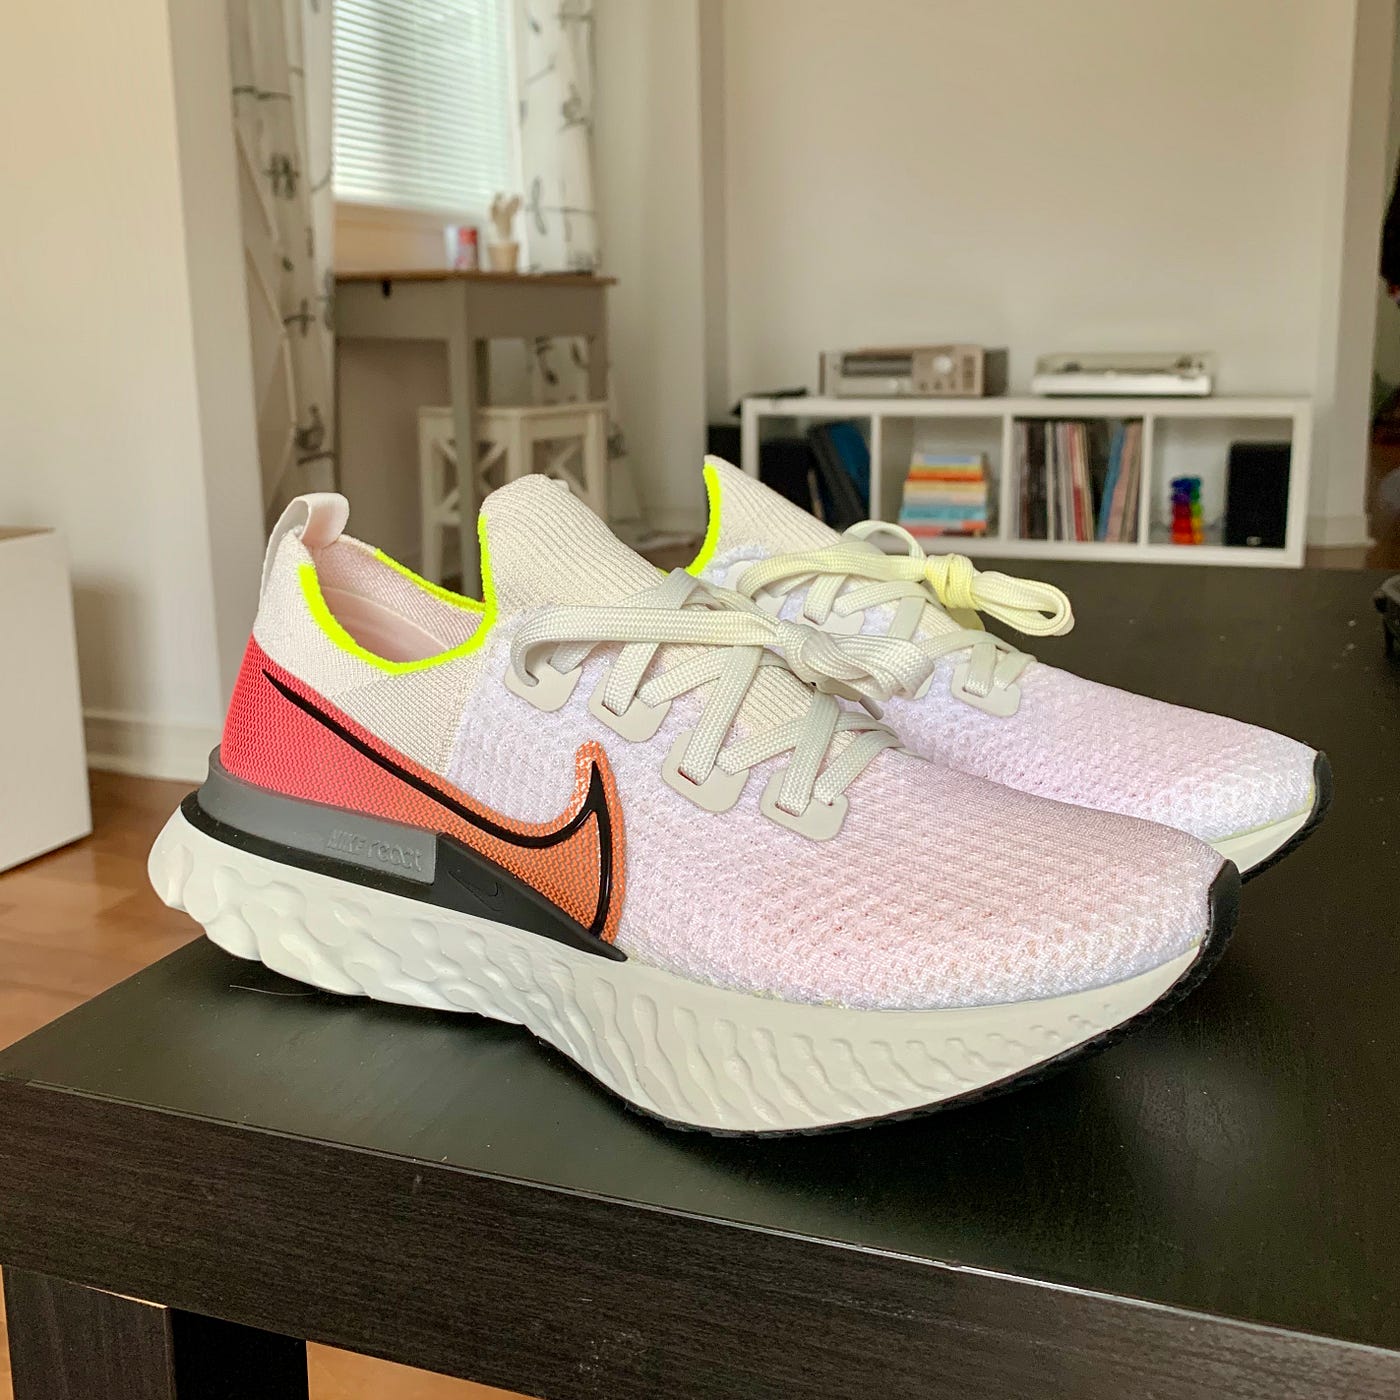 Minimalist Runner Wears Nike React Infinity Run Flyknits for One Run and  Writes a Review, by Mike Wheeler